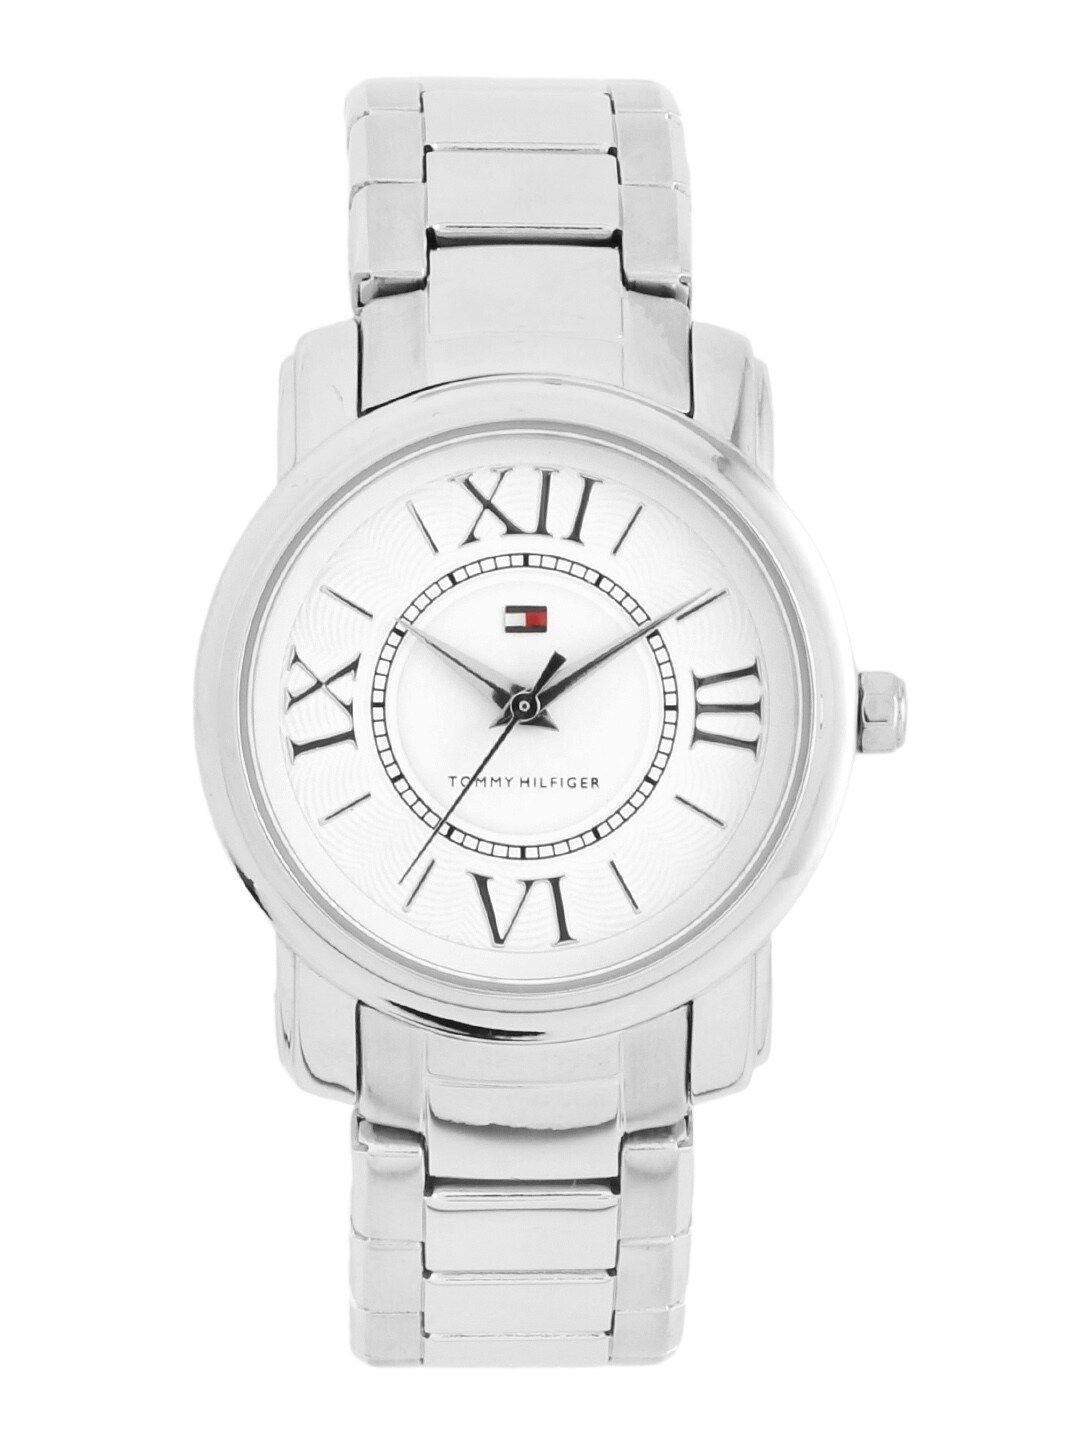 Tommy Hilfiger Women White Dial Watch TH1780808-D